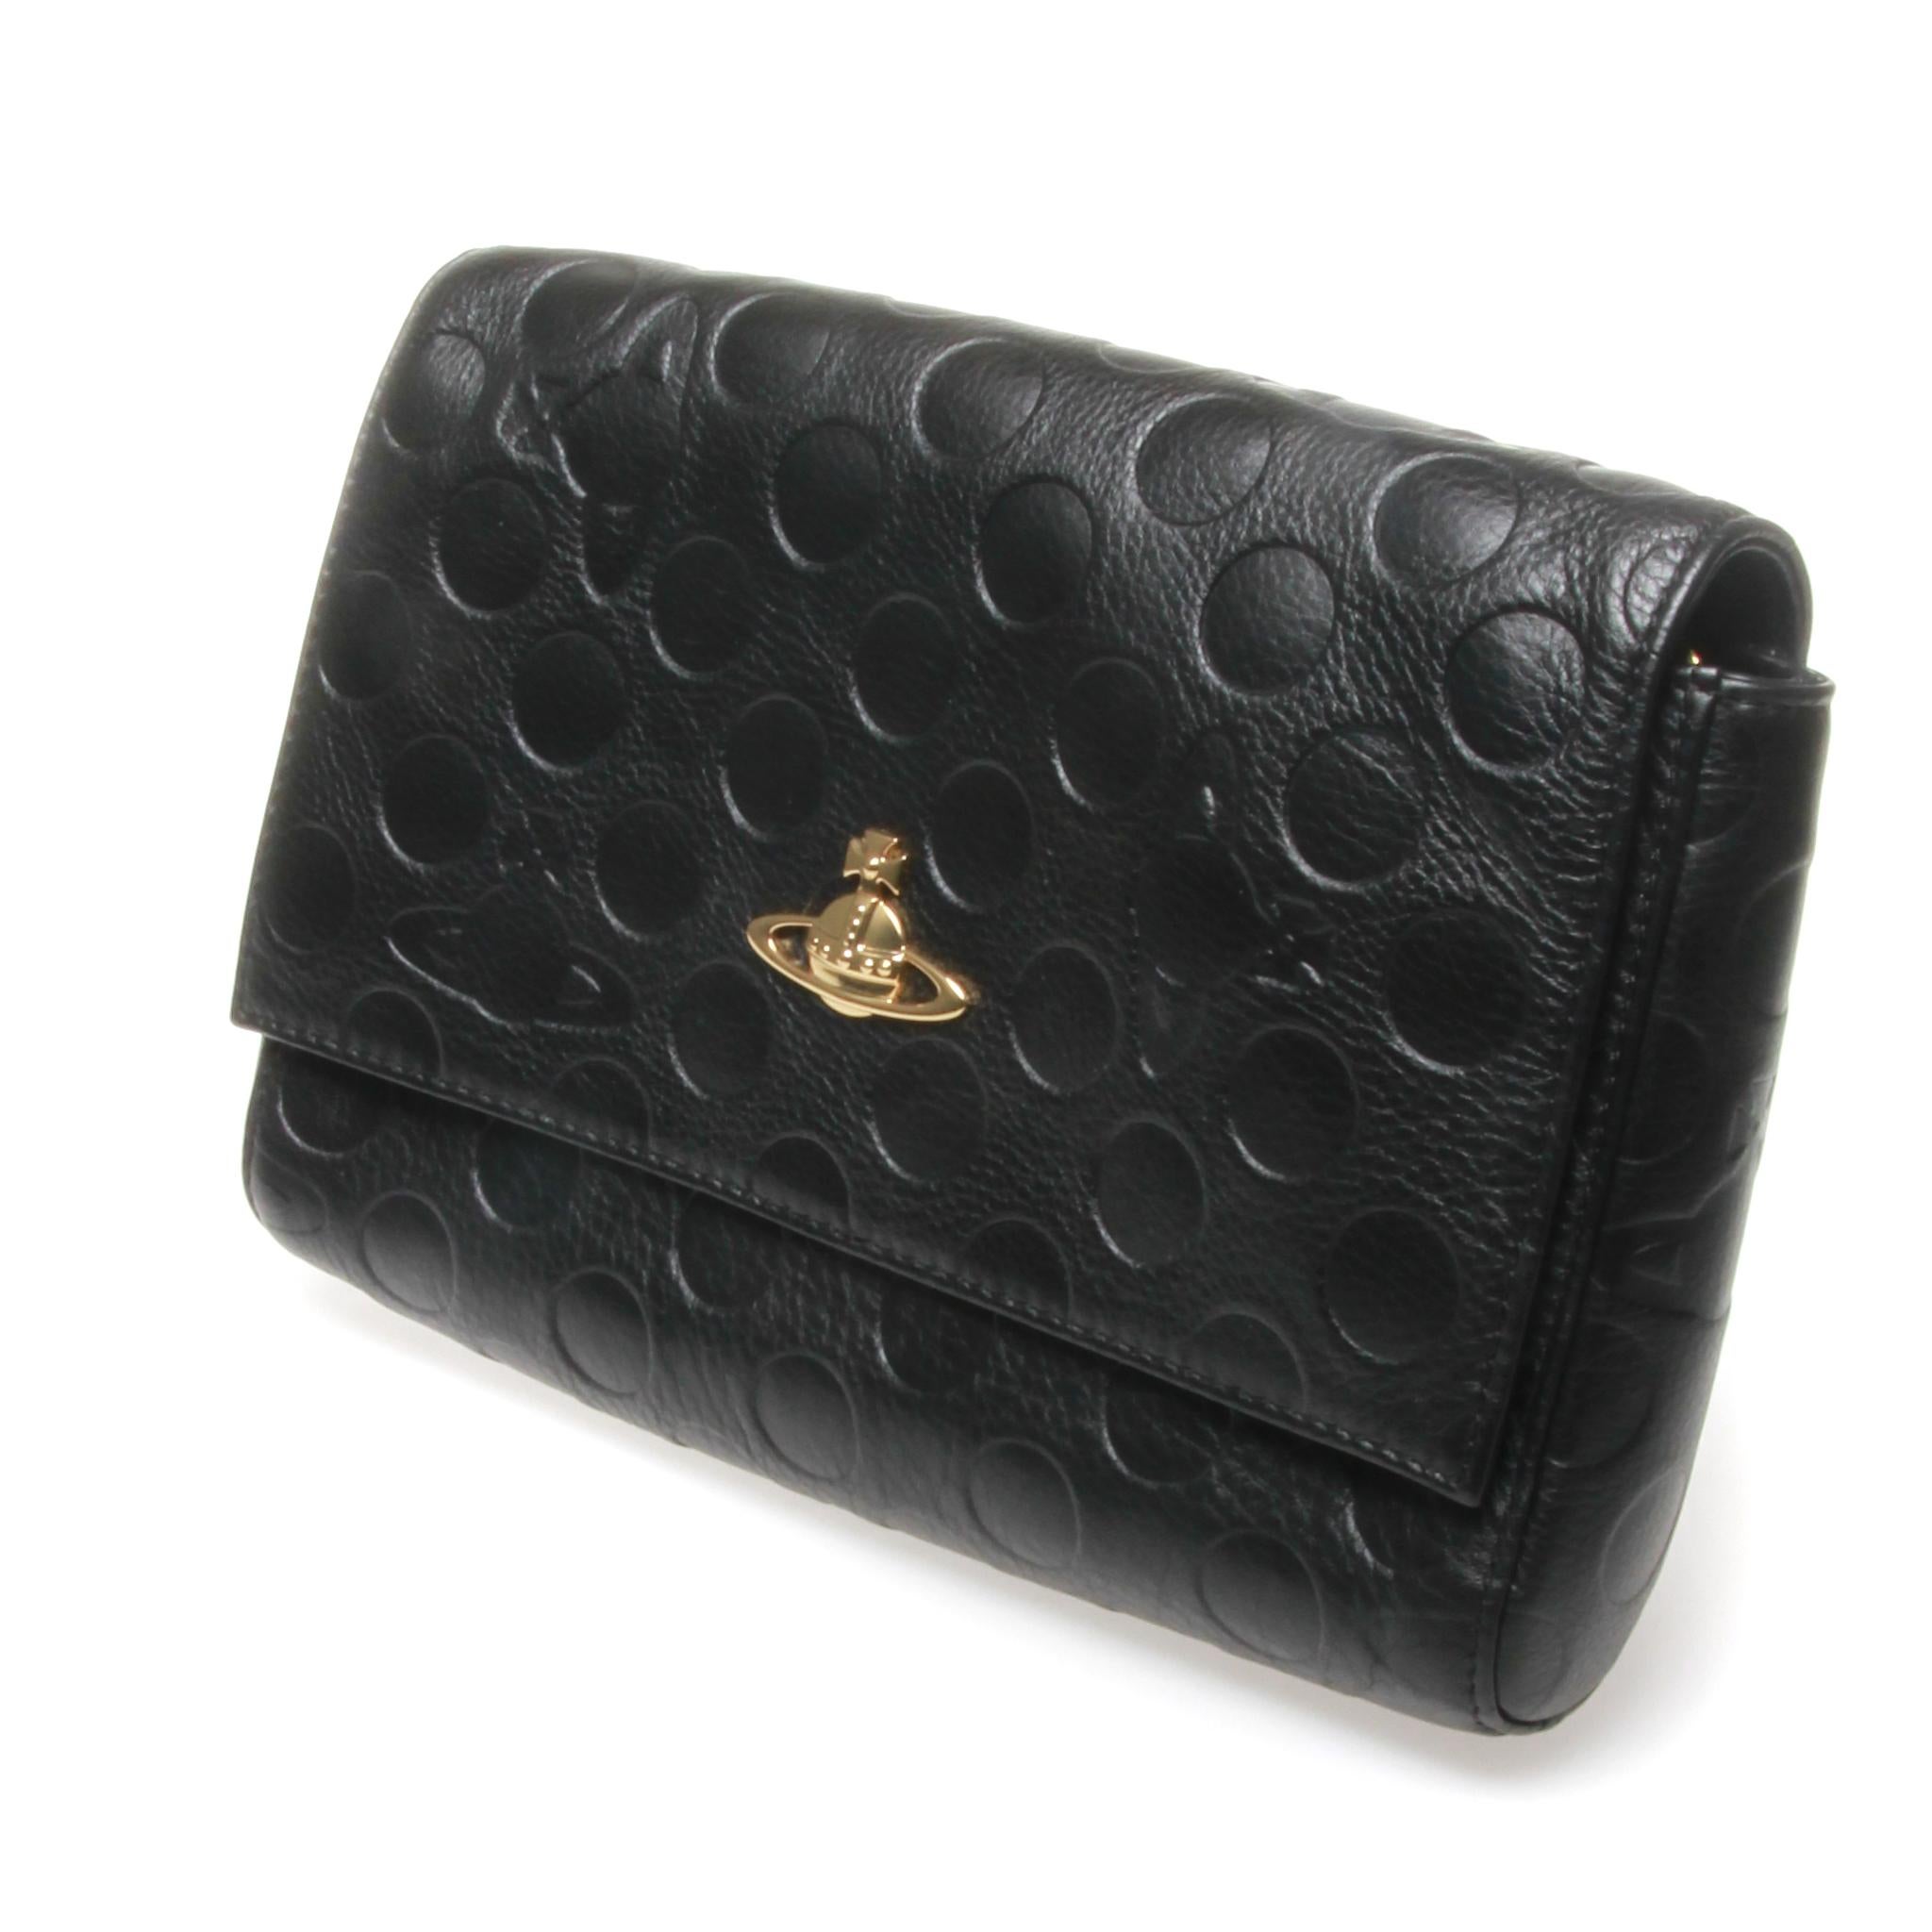 Vivienne Westwood polka dot embossed, black with gold hardware with strap